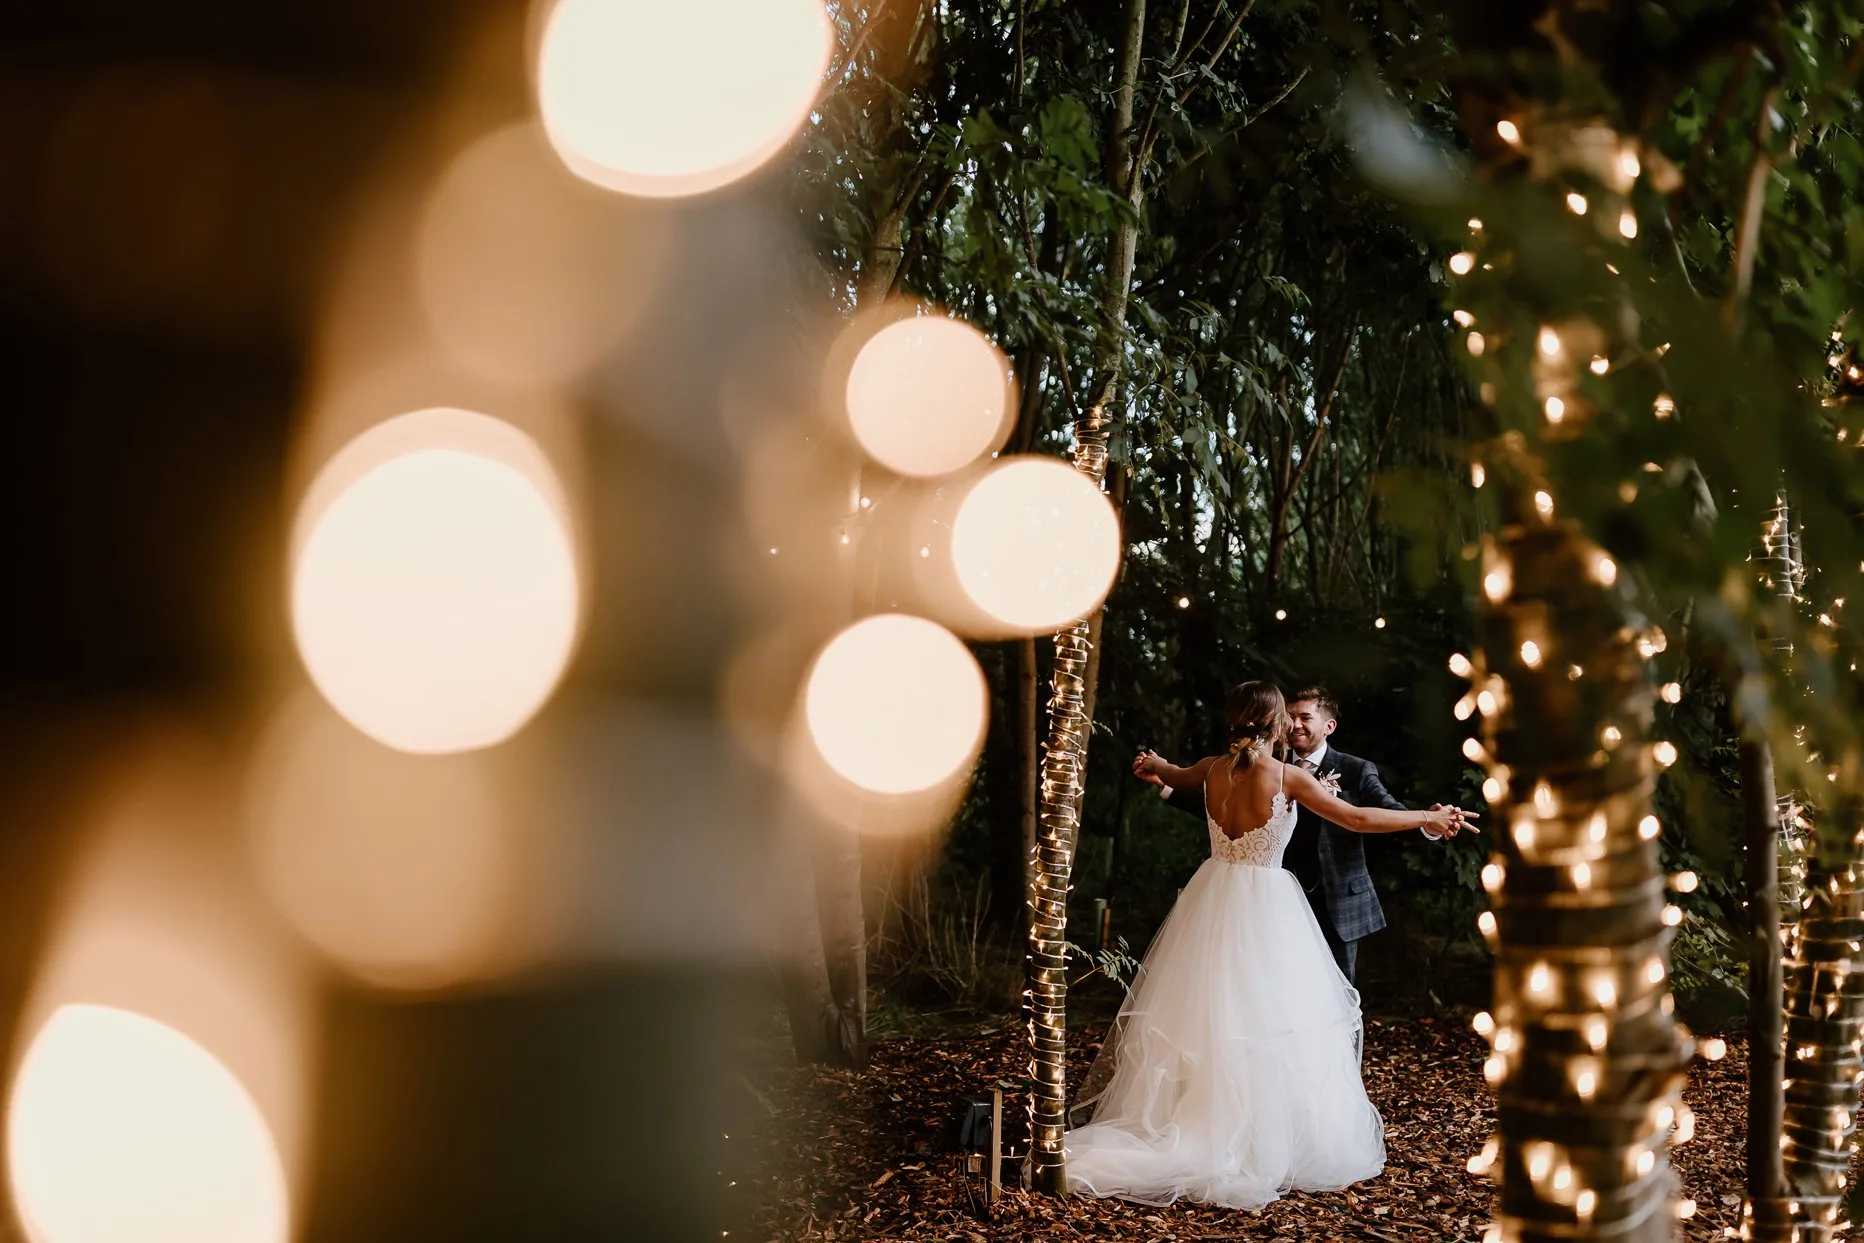 Bride and groom dancing in between the trees on the woodland dancefloor at Oaklands. The trees are decorated with gold fairylights.